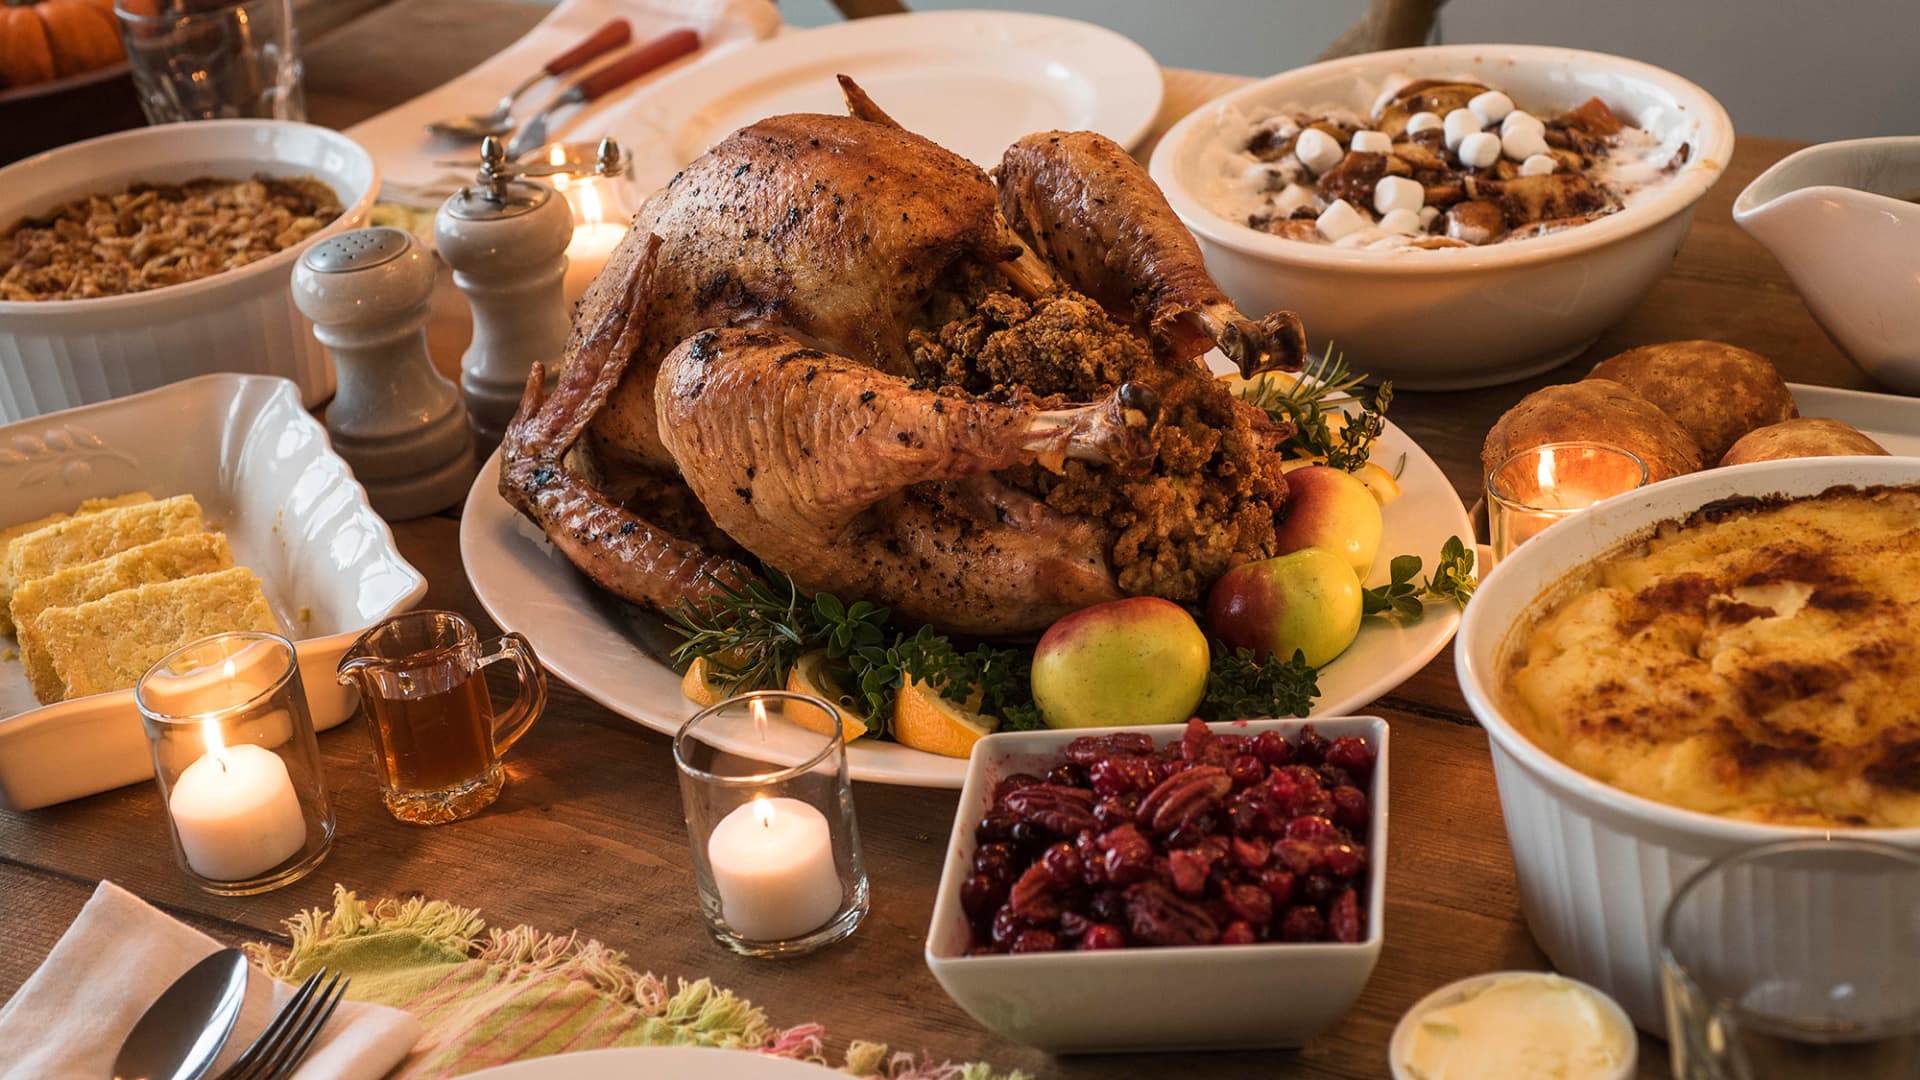 It could be cheaper to dine out on Thanksgiving this year as CPI ‘food at home’ prices soar | CNBC